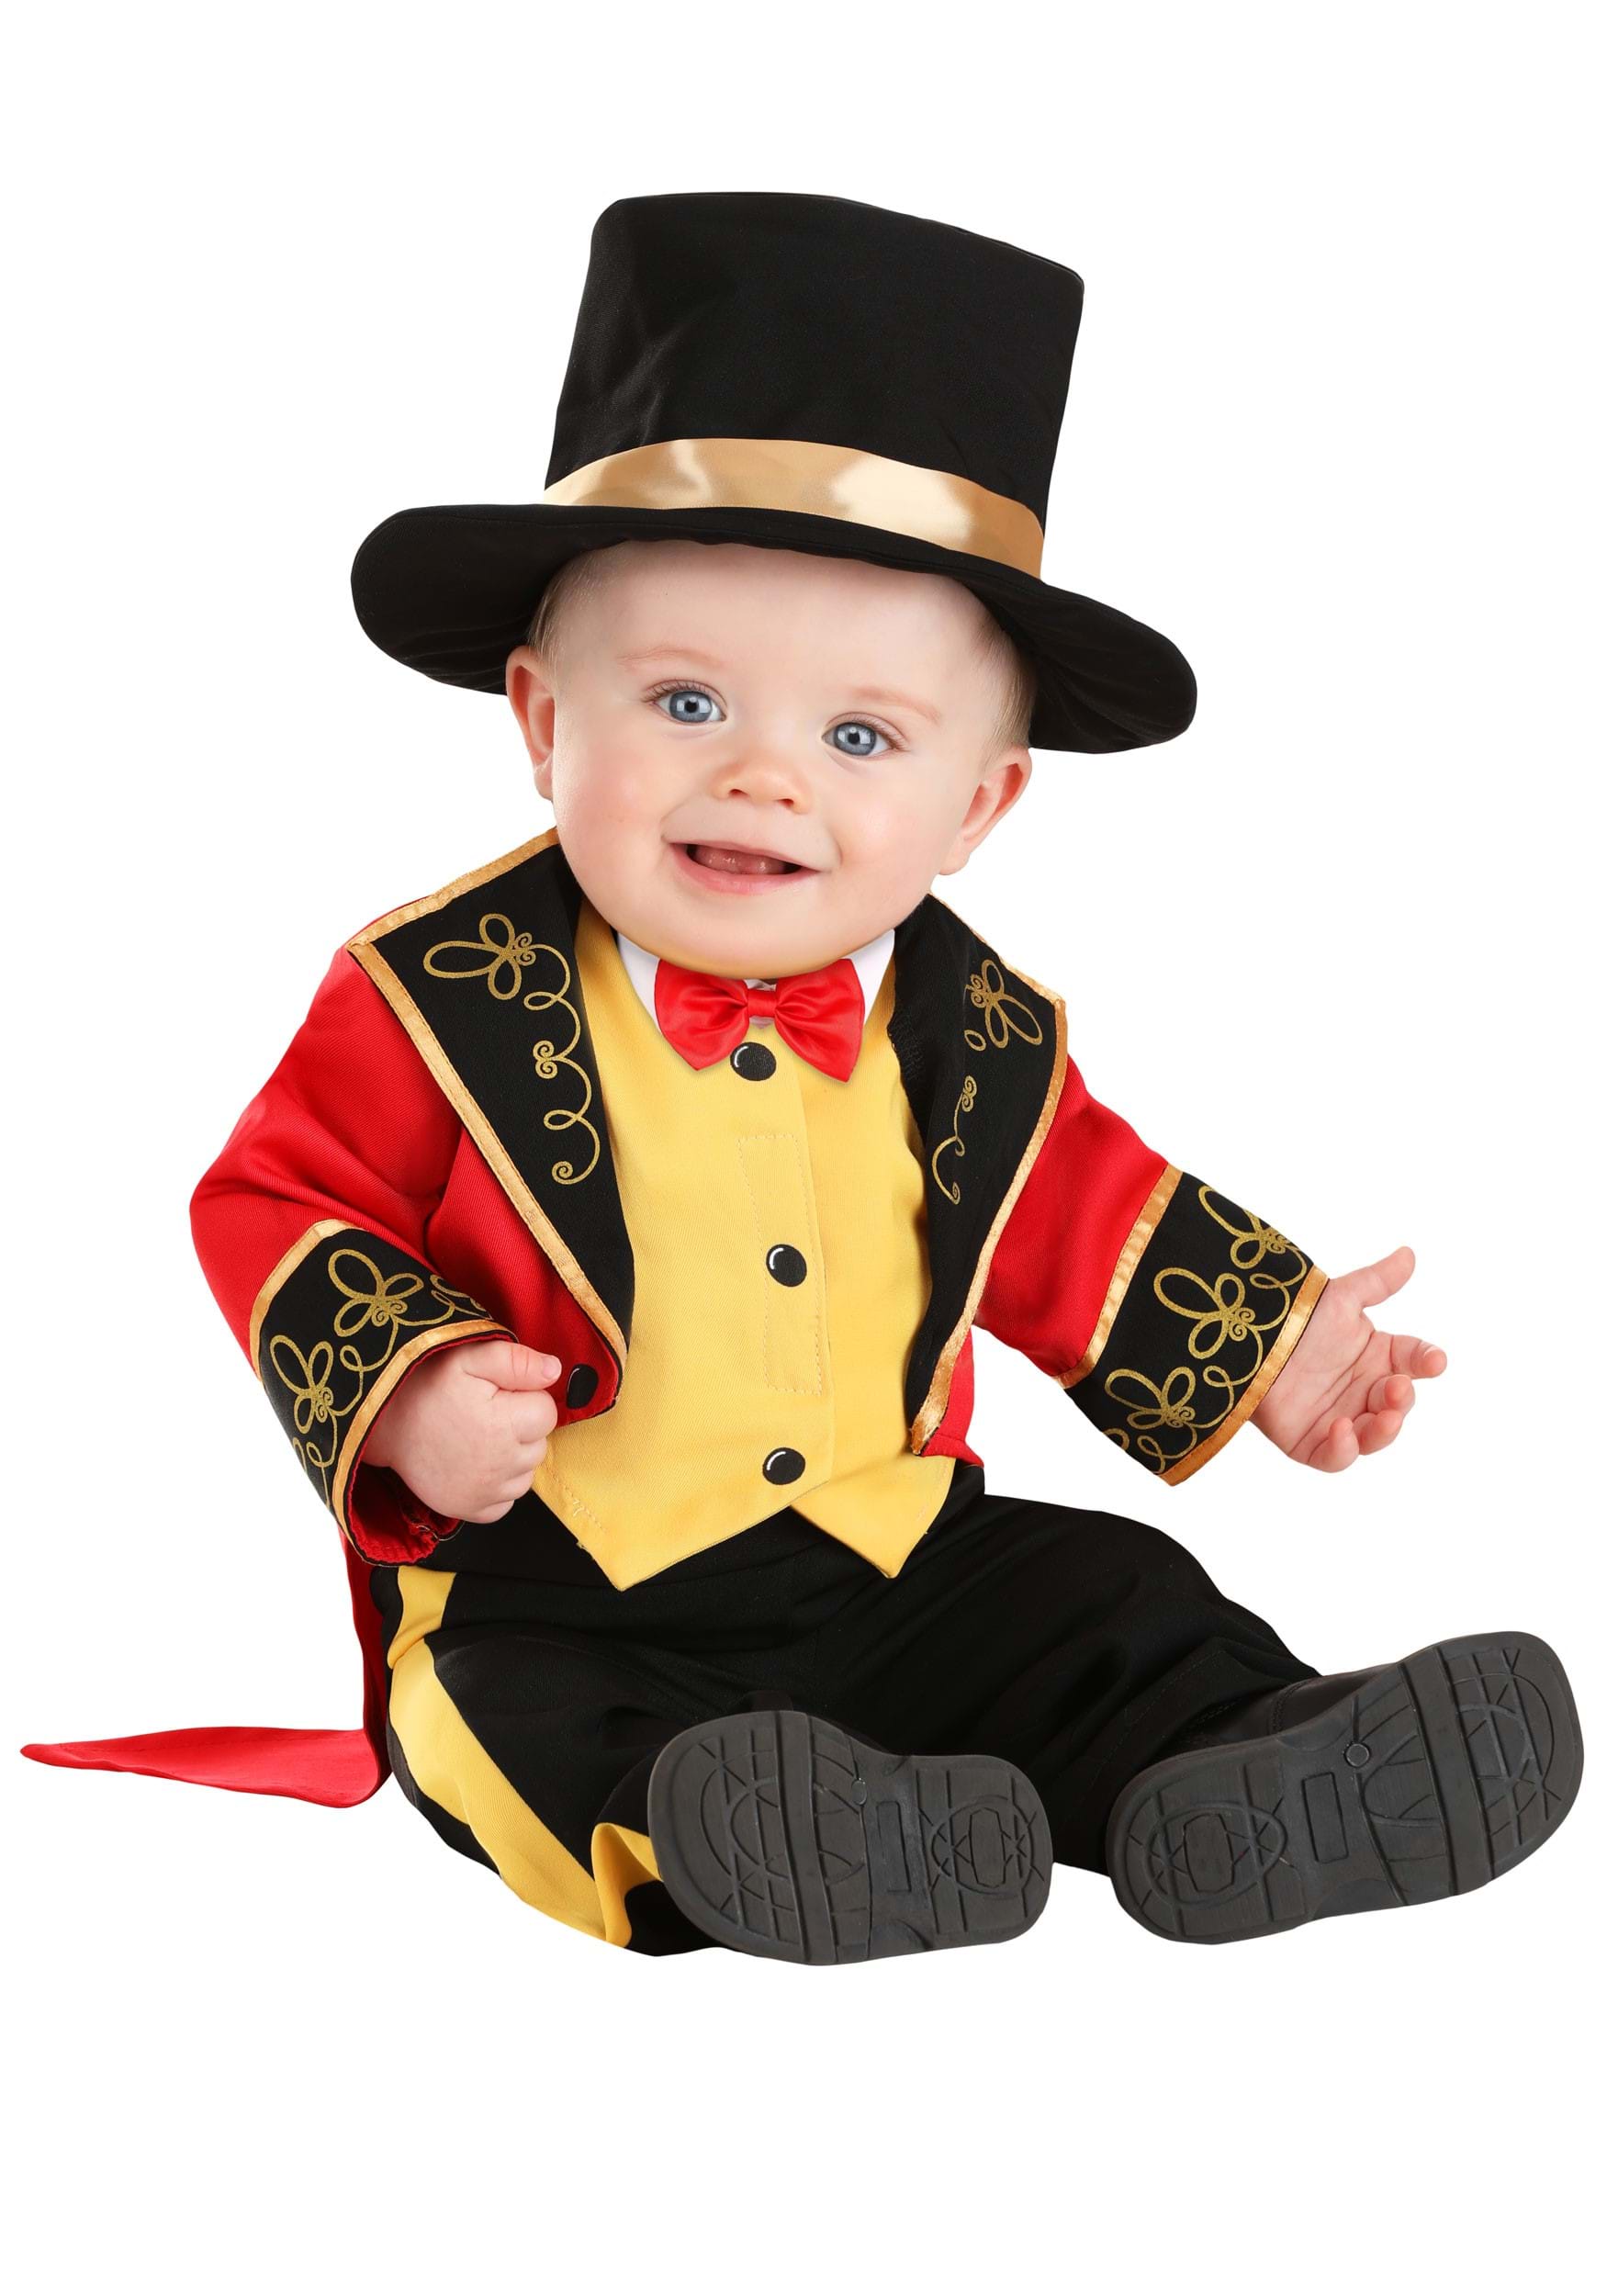 Circus Ringmaster Costume for Infants